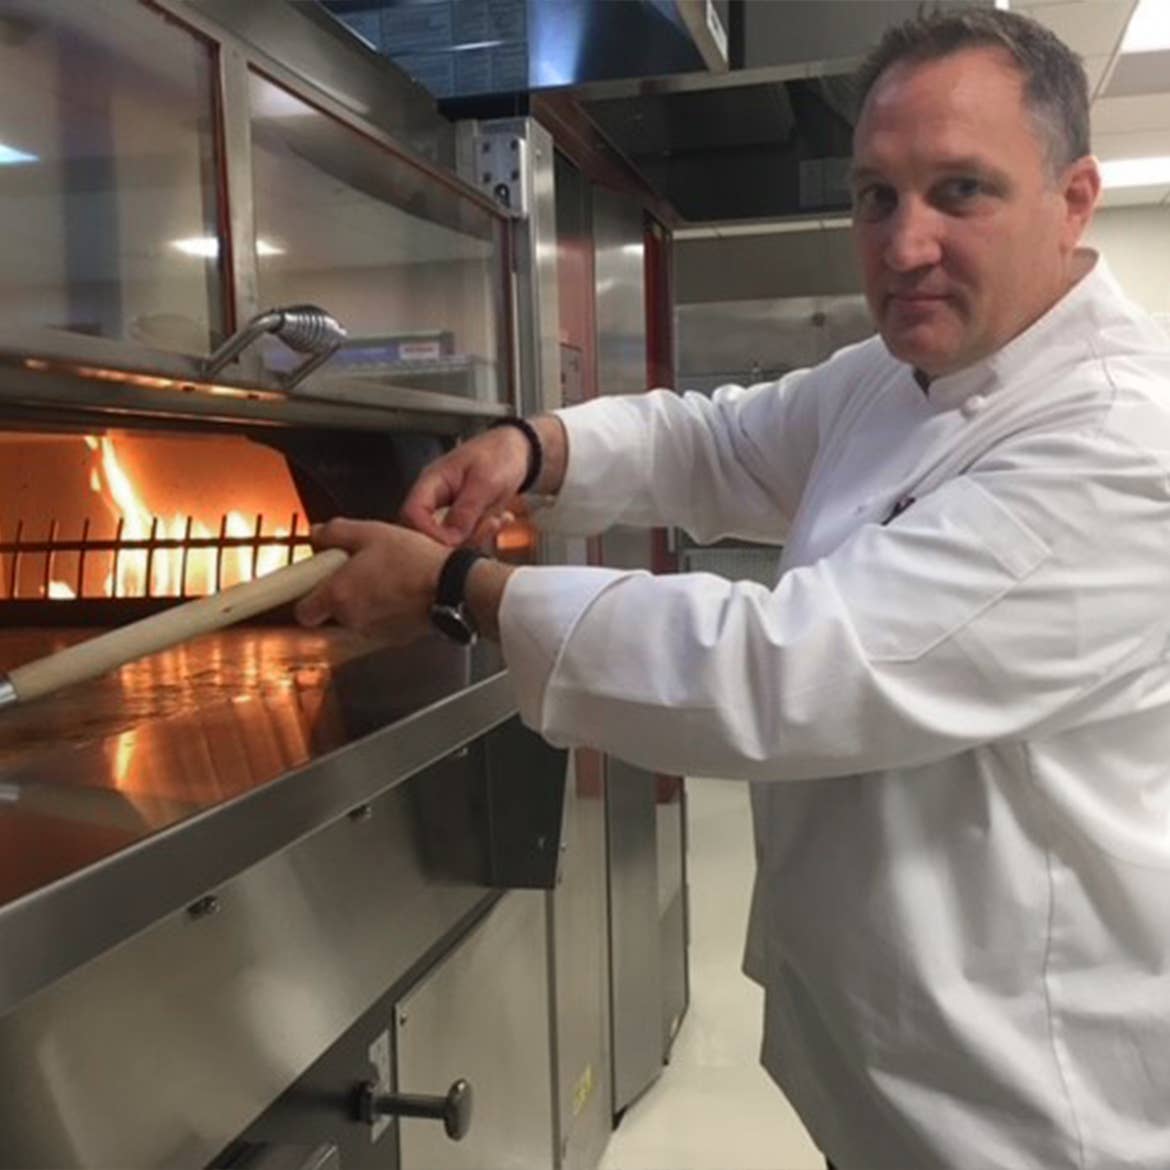 A man wearing a chef jacket stands near an oven.